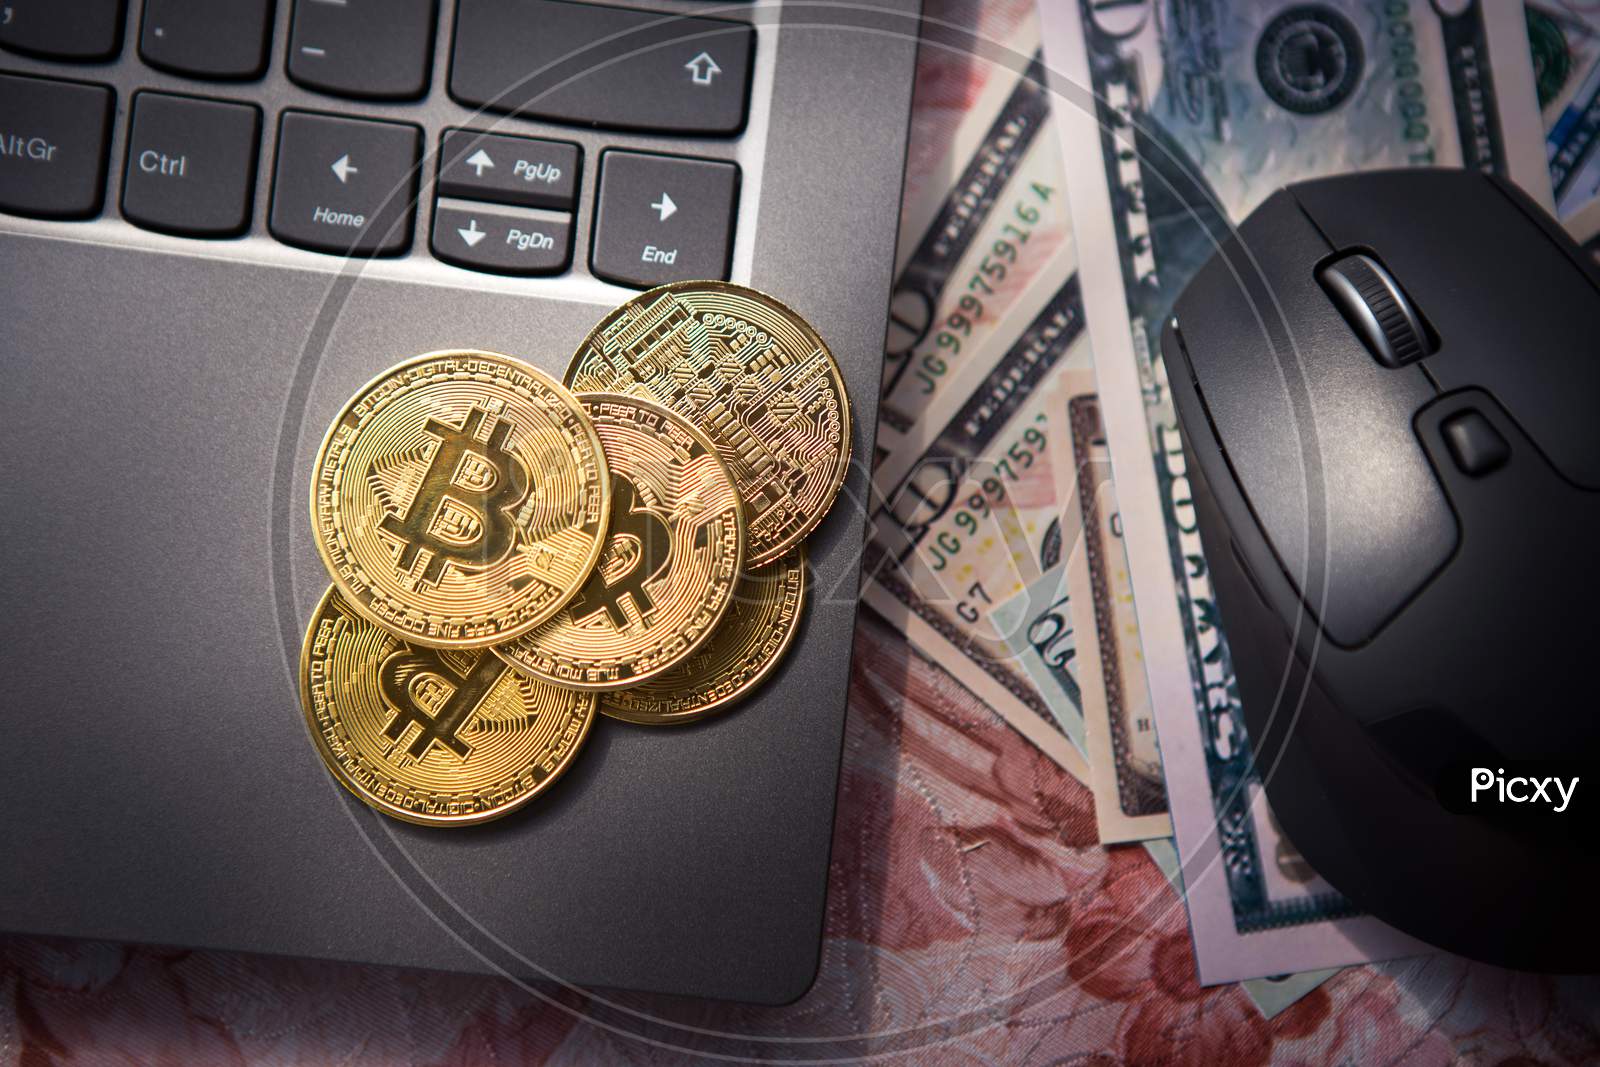 Top View Of Bitcoin Gold Coins On Laptop And Next To Us Dollar Banknotes And Computer Mouse